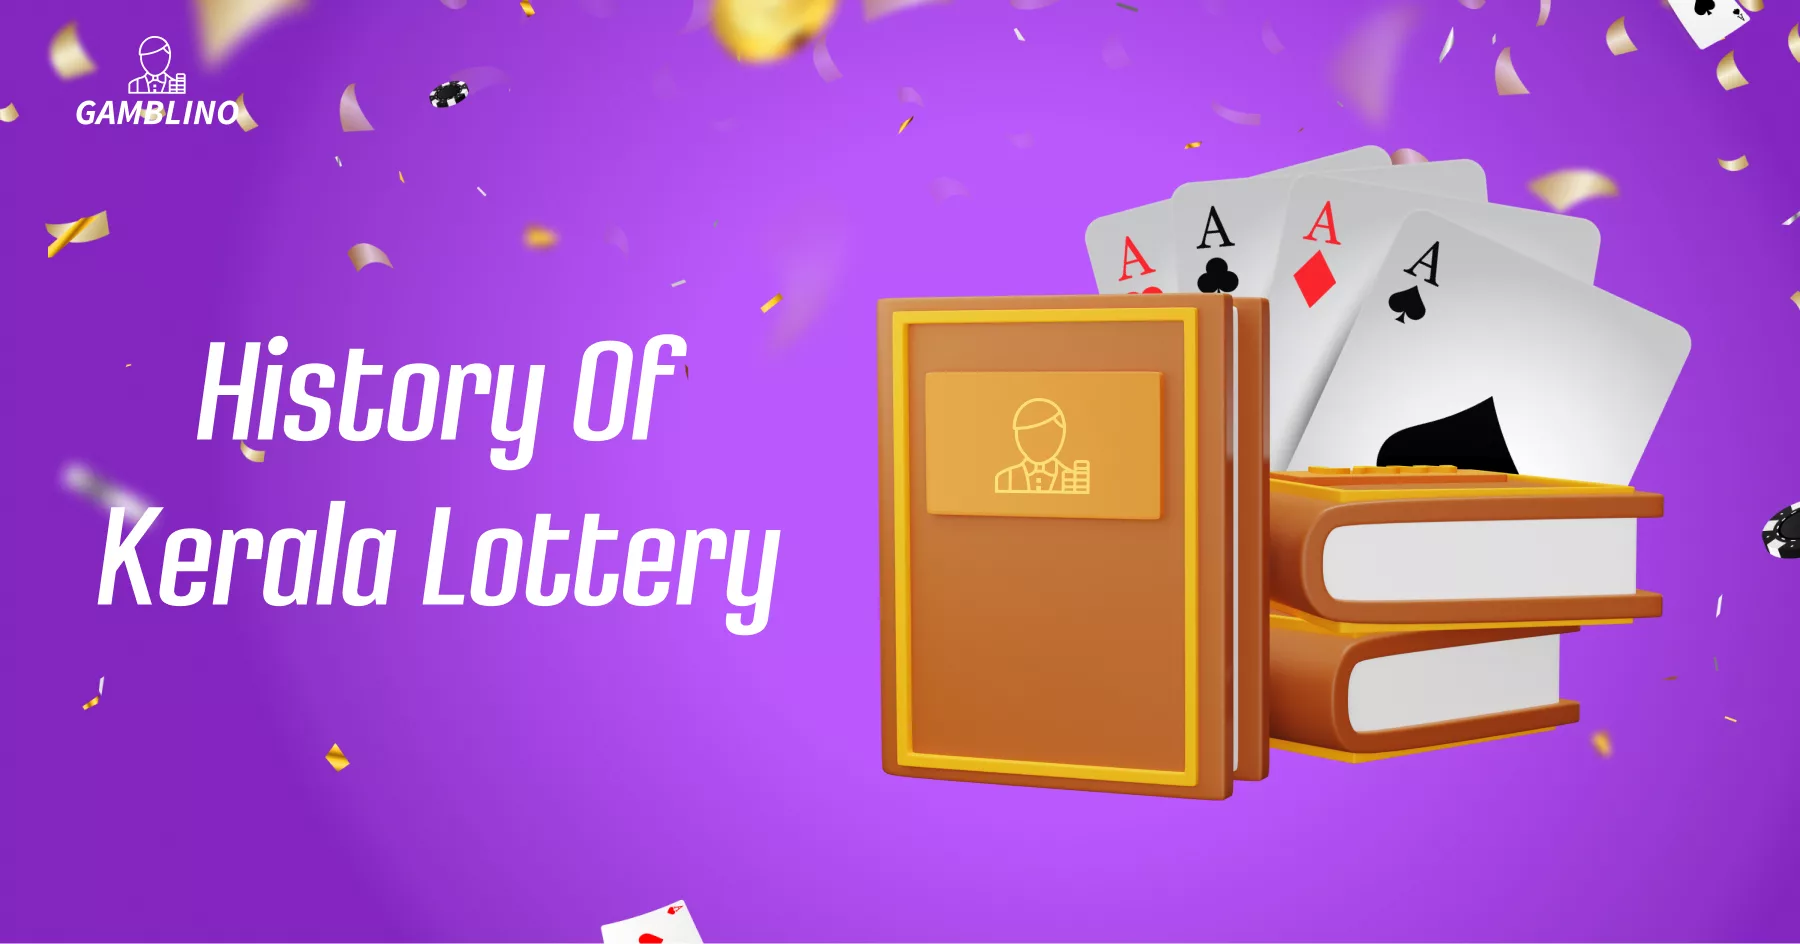 History of Kerala Lottery in books and cards 